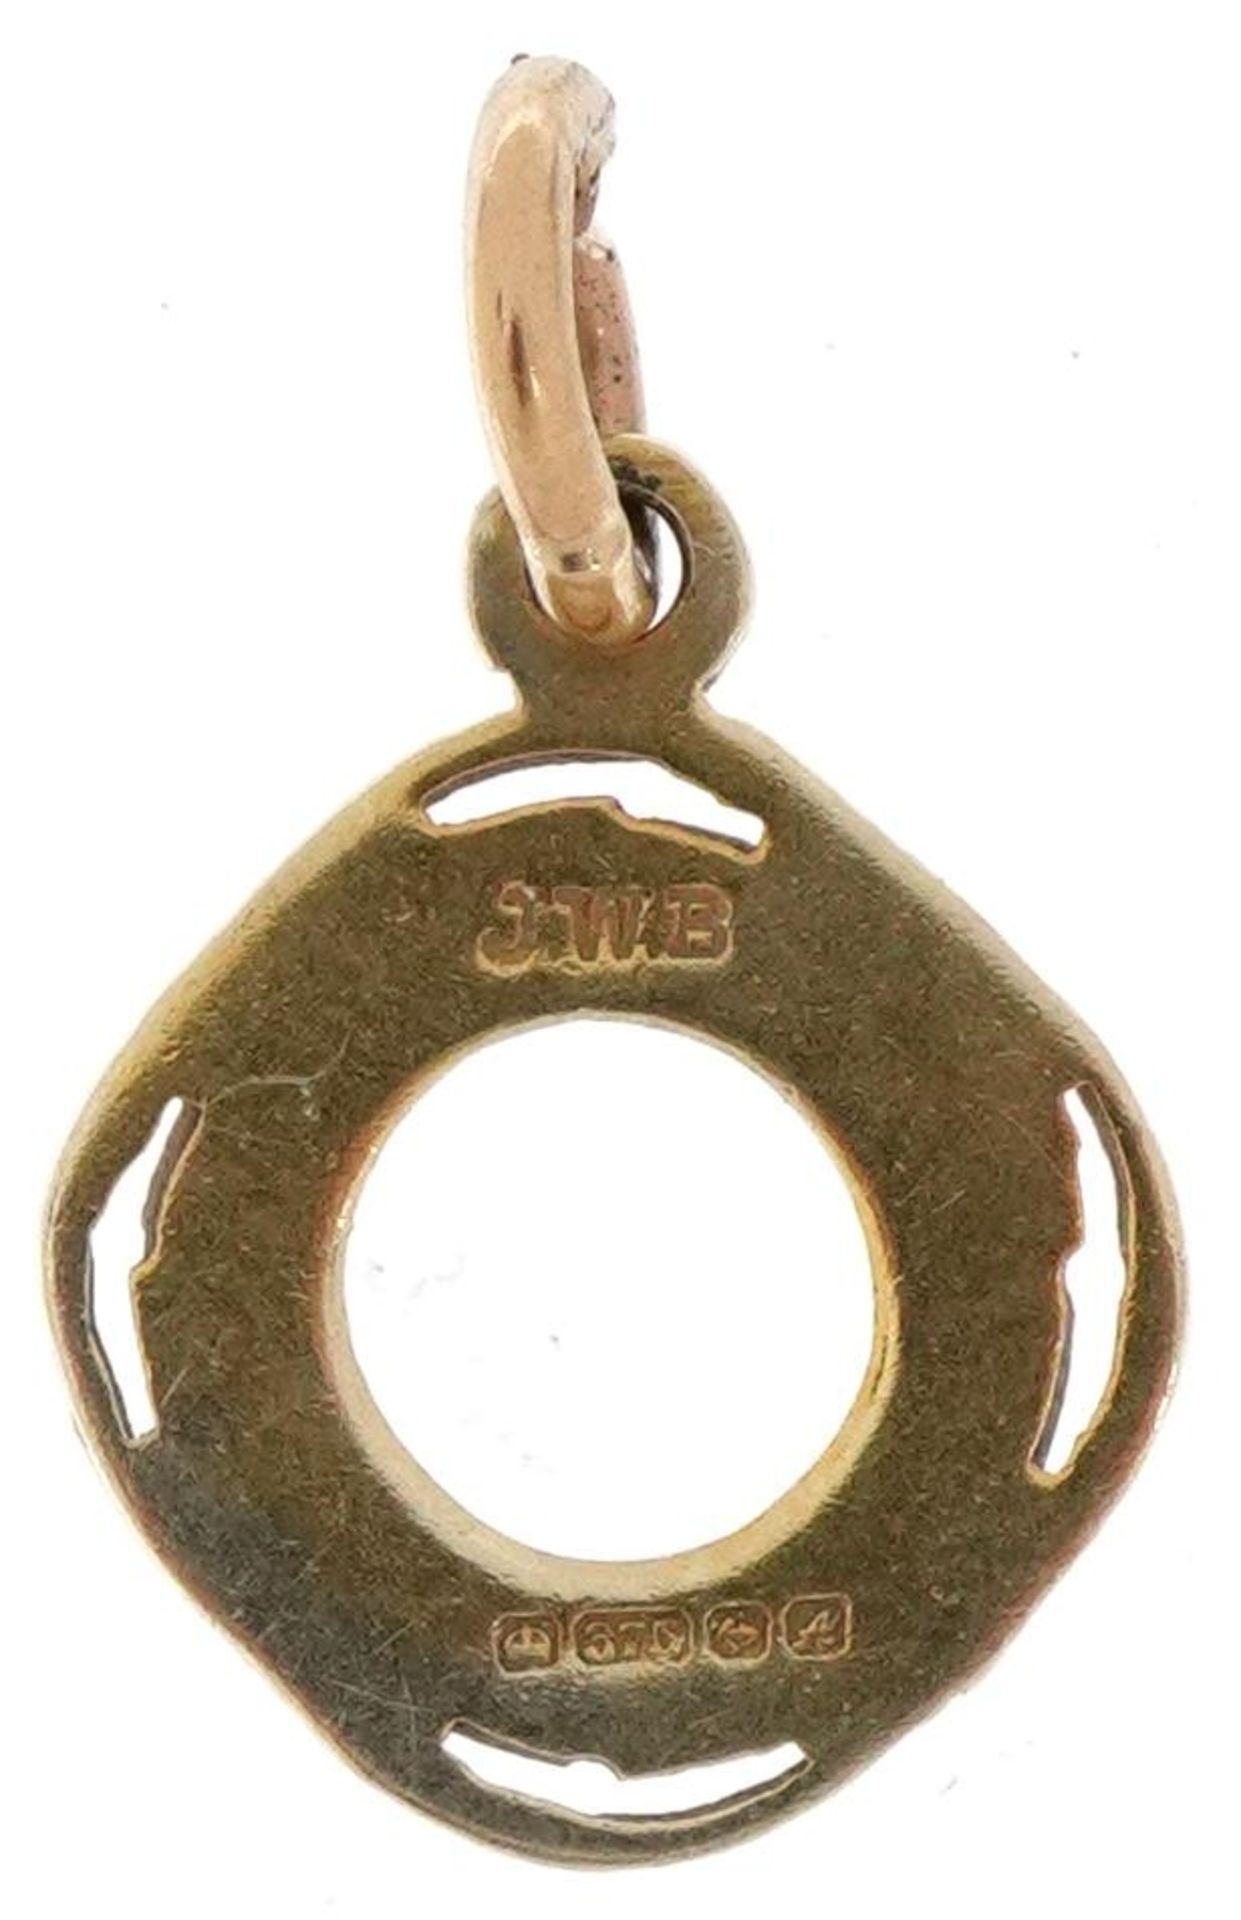 9ct gold and enamel charm in the form of a lifebuoy, 1.4cm high, 1.2g - Image 2 of 3